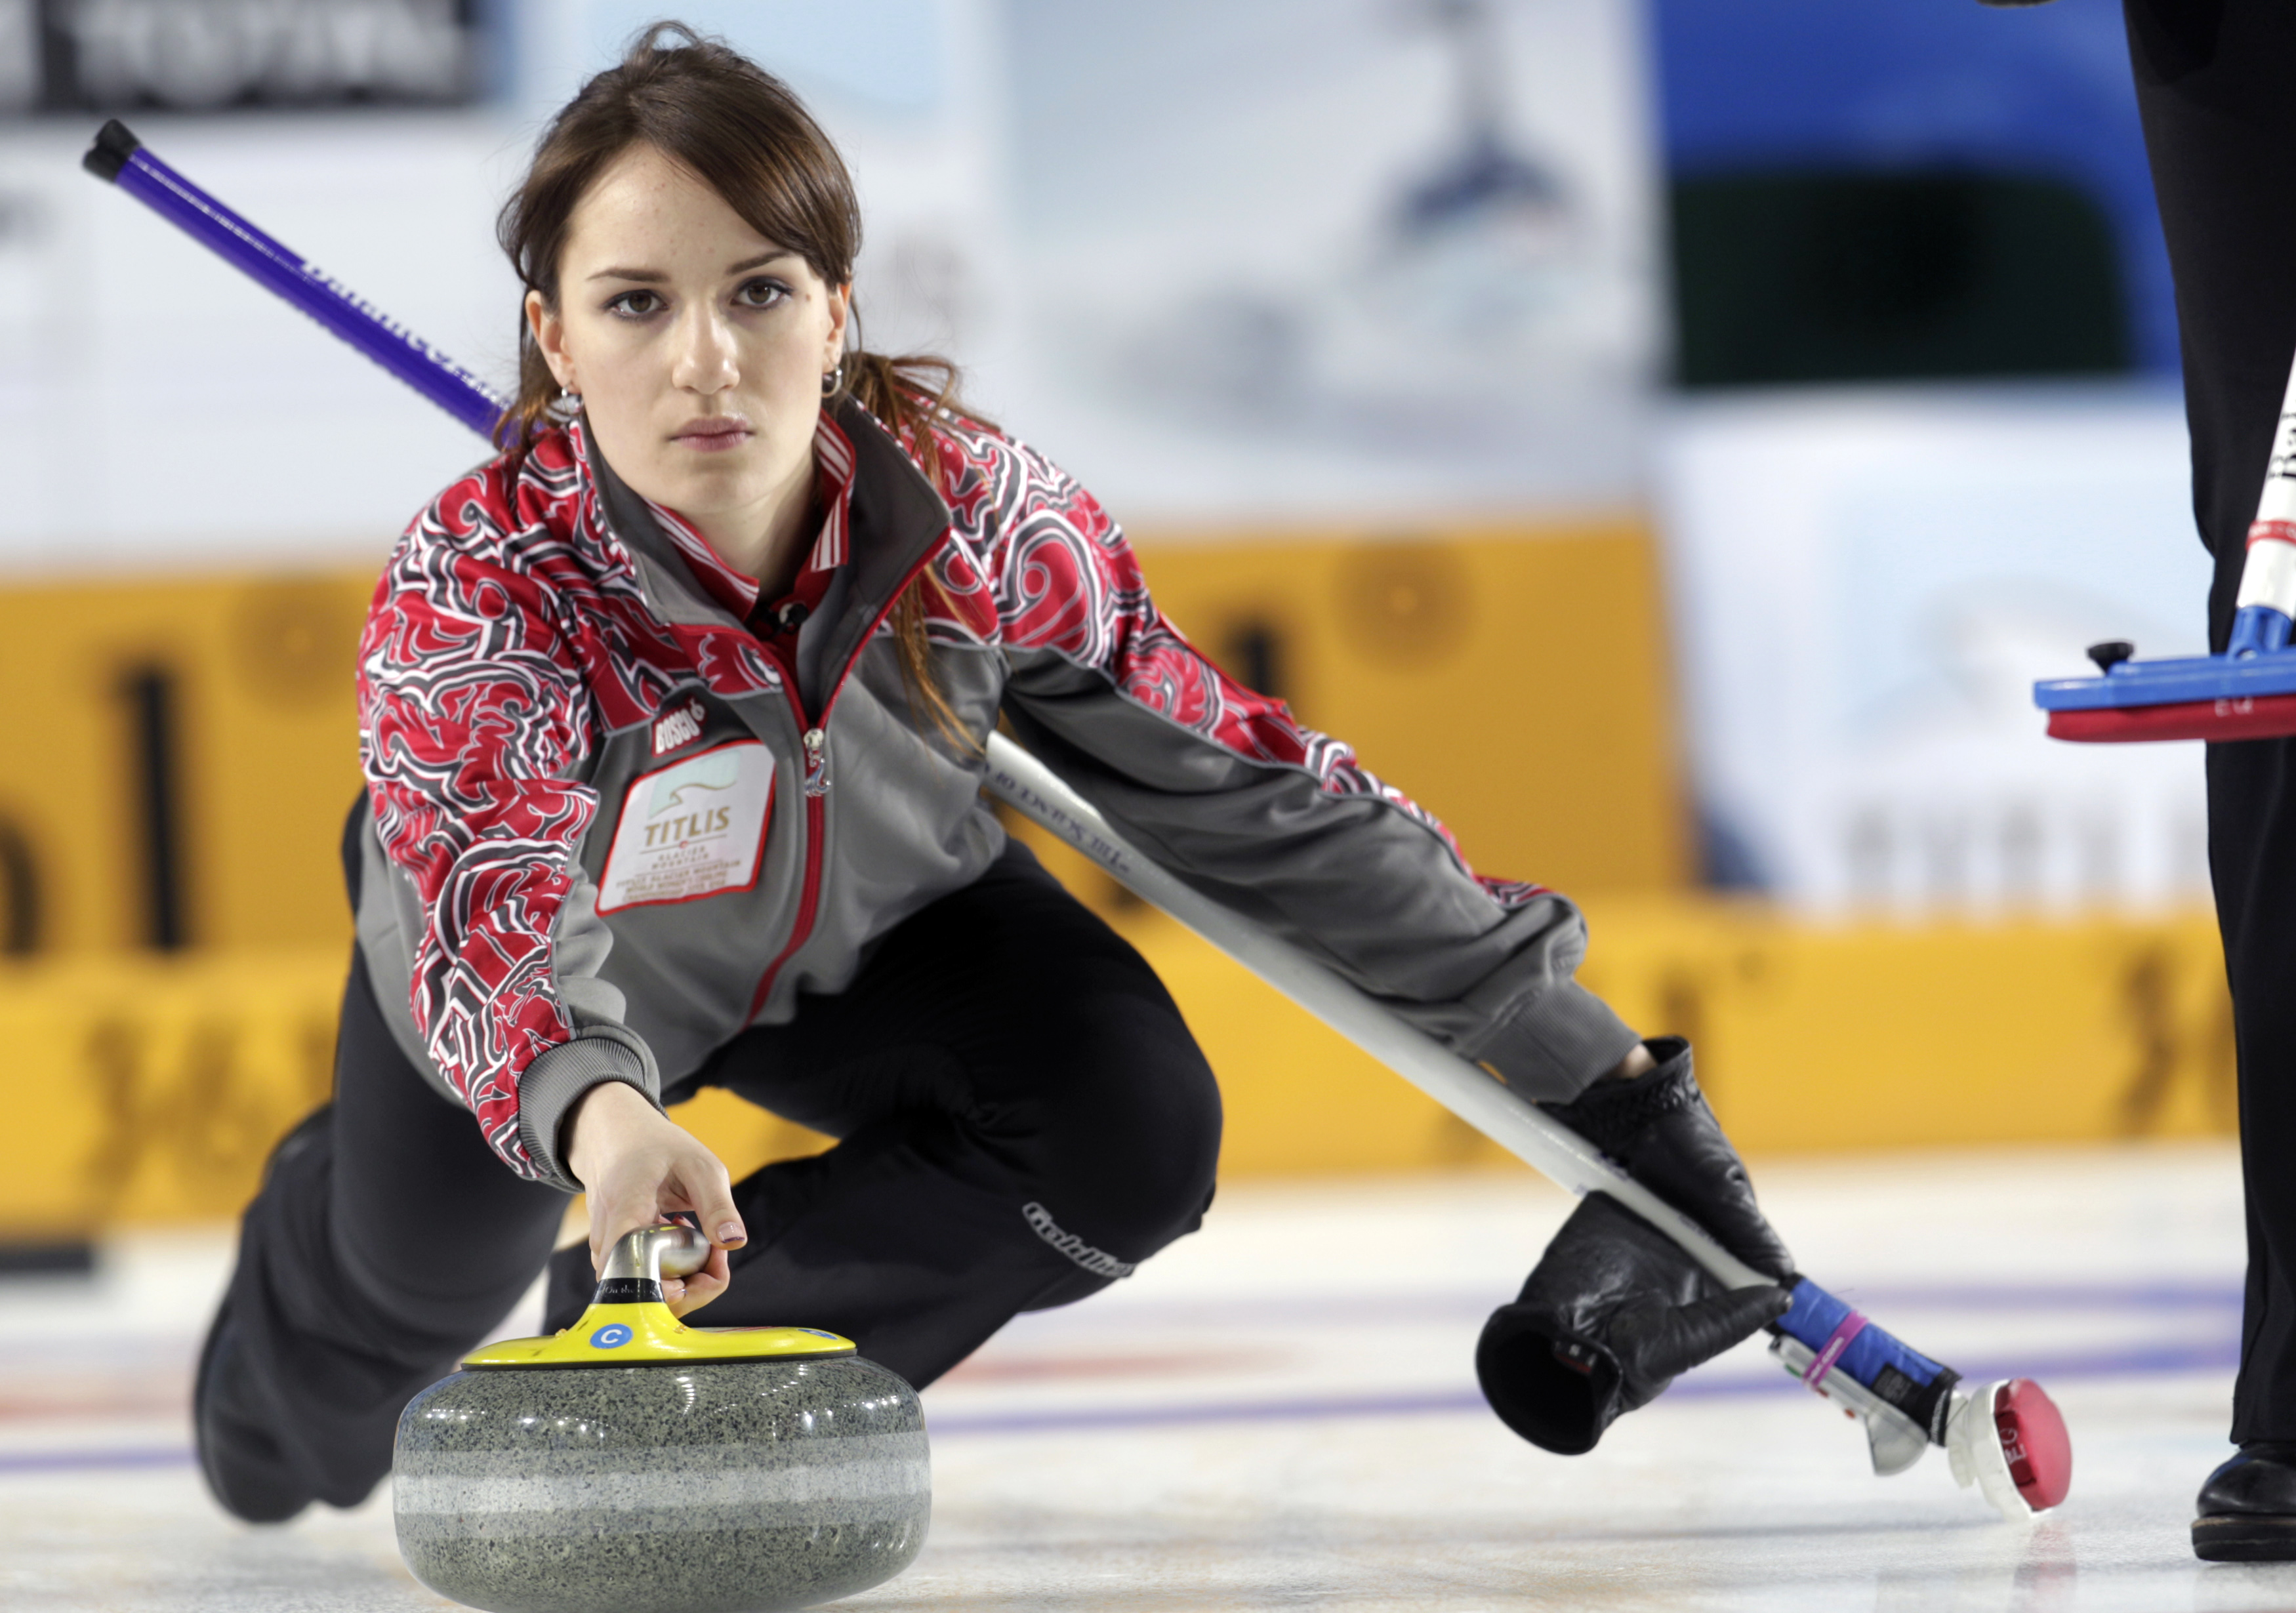 Russia's skip Anna Sidorova delivers a stone during their World Women's Curling Championship qualification round match against the U.S. in Riga March 21, 2013. REUTERS/Ints Kalnins